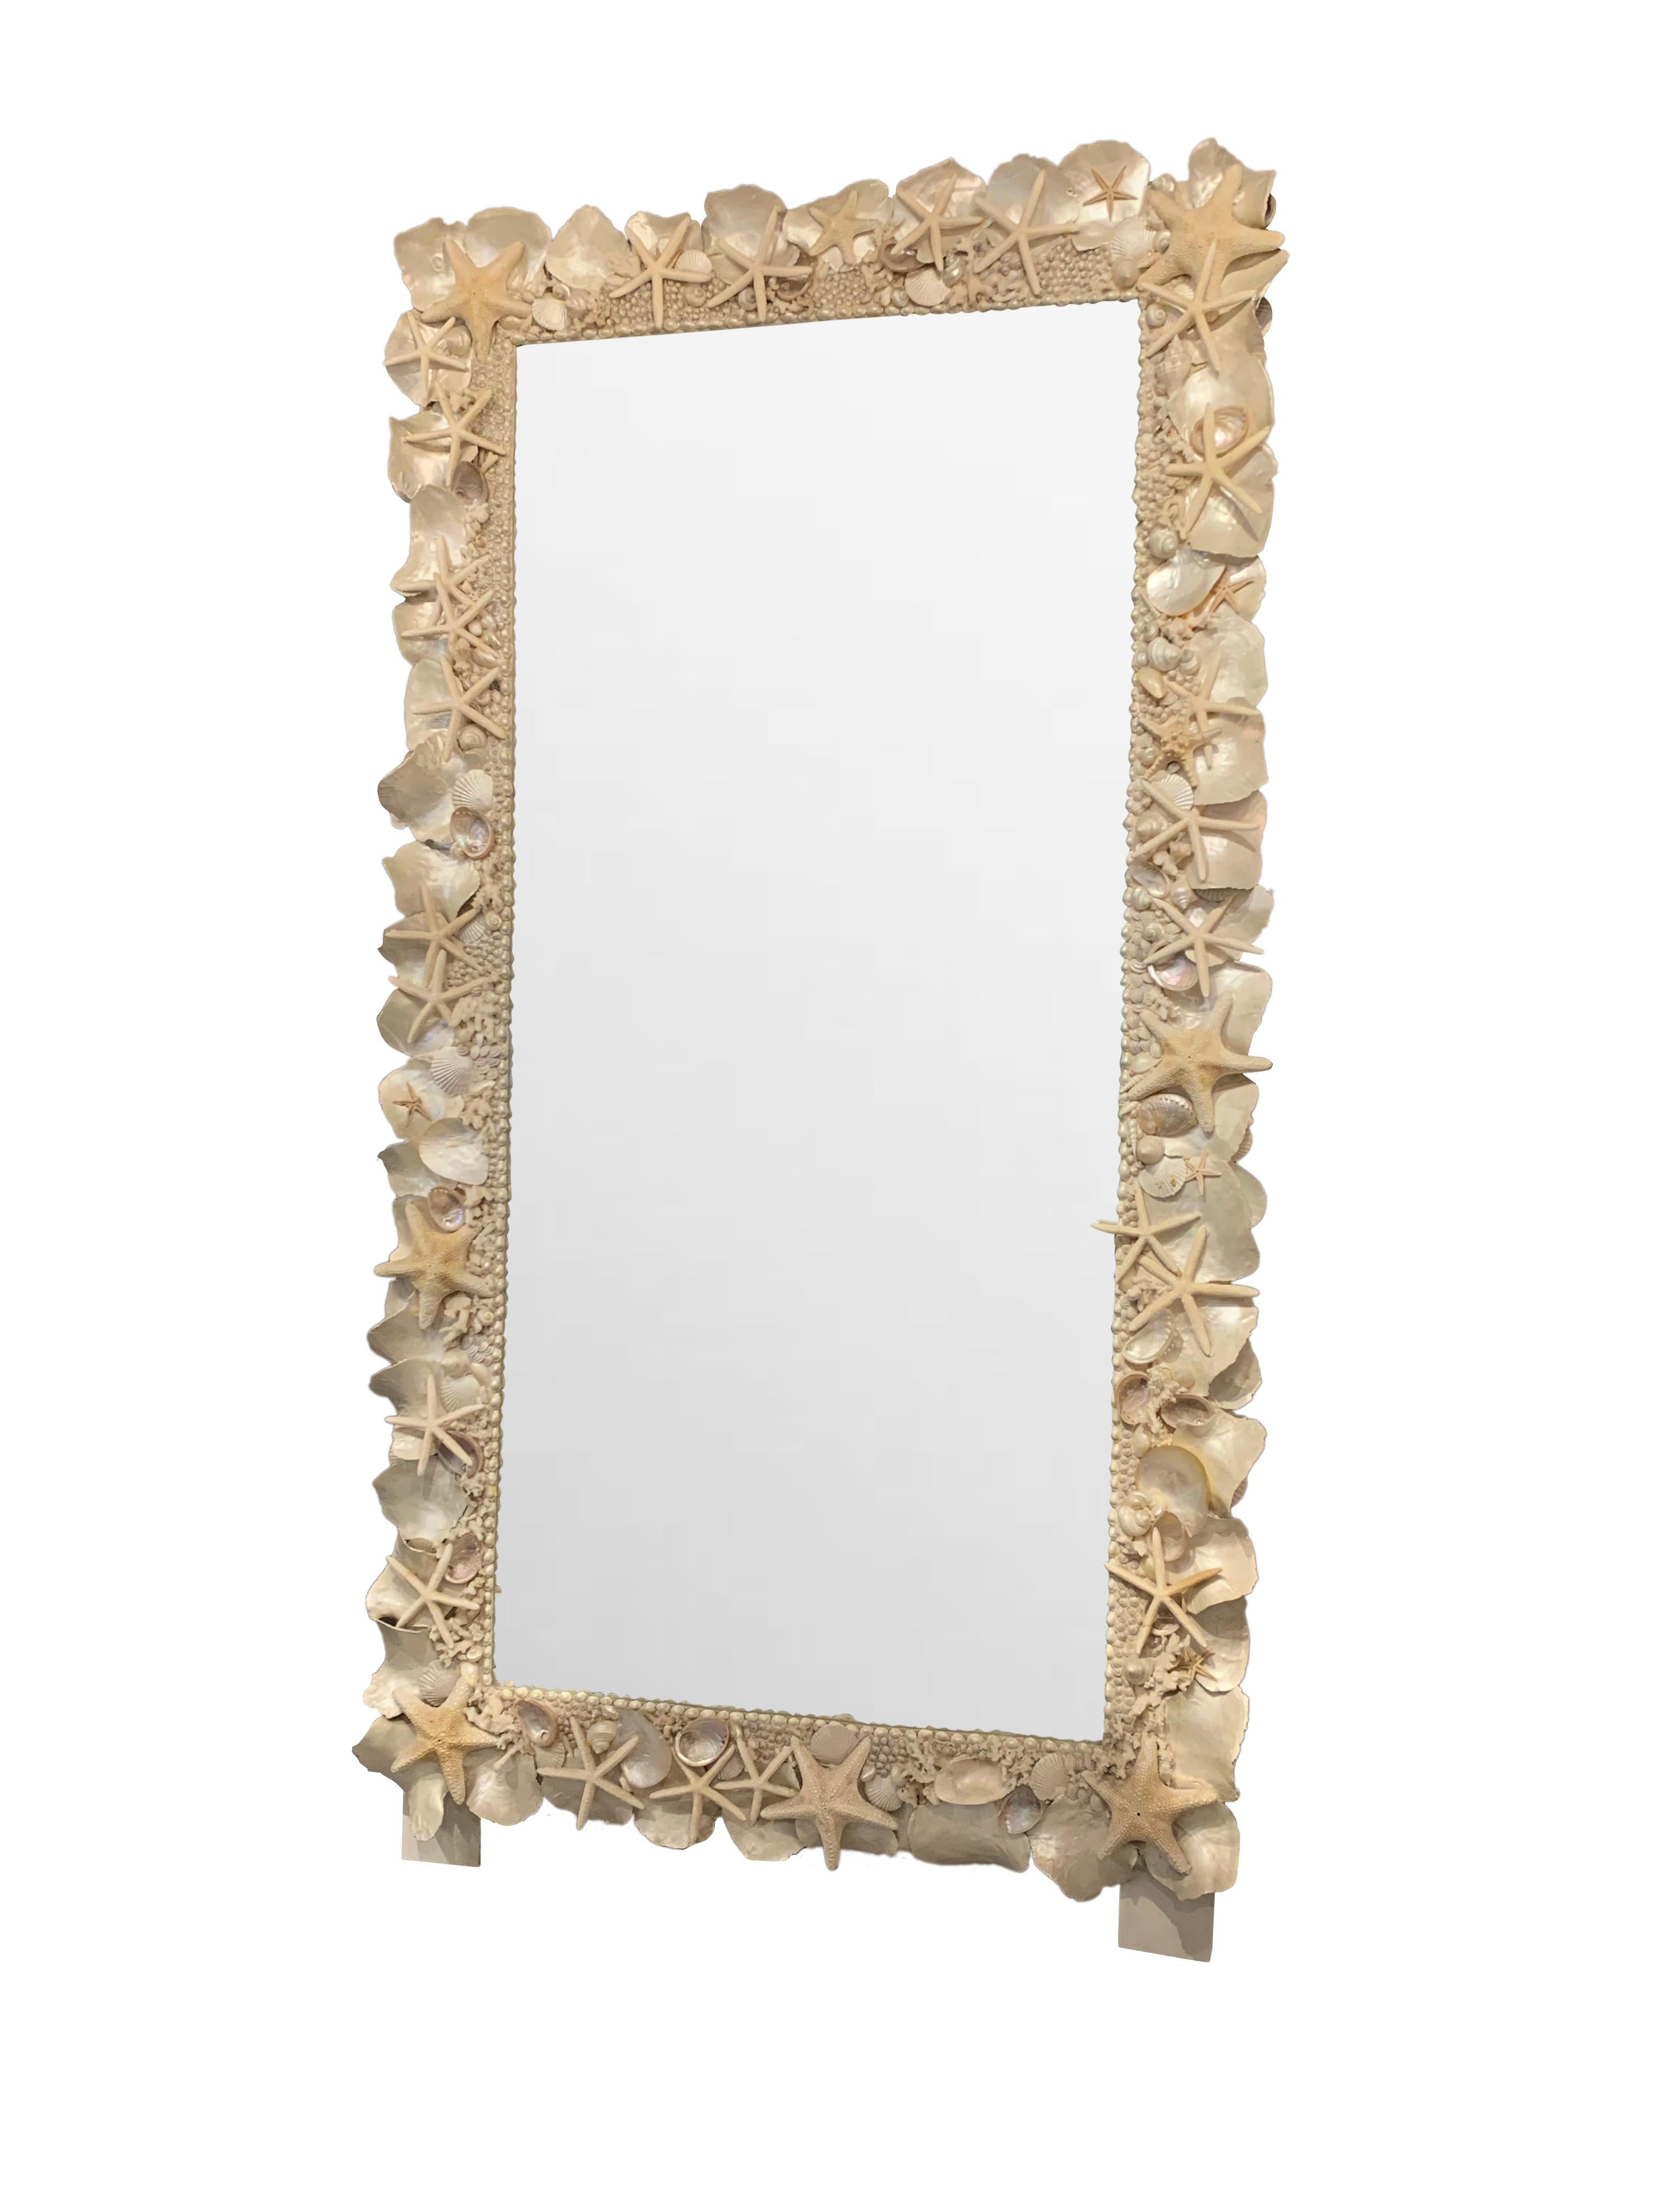 Exceptional Contemporary French extra extra large shell framed mirror.
A variety of shells are affixed to a wooden frame.
Wooden stands attached allowing the mirror to sit on the floor without damage to the shell frame.
Beveled mirror.